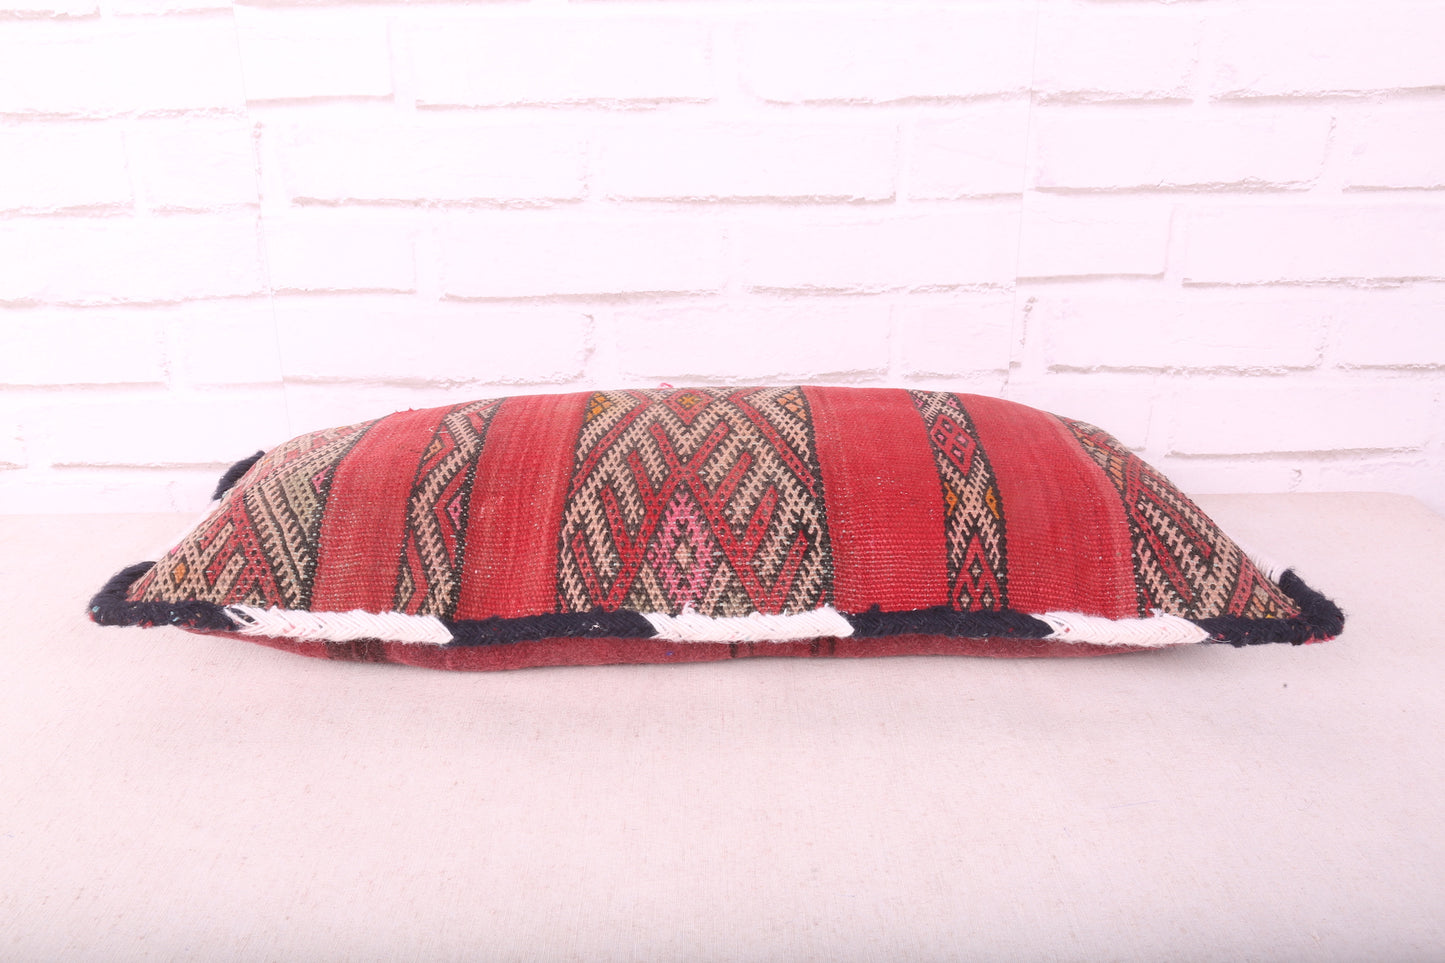 Red Moroccan pillow rug kilim 12.9 inches X 25.1 inches